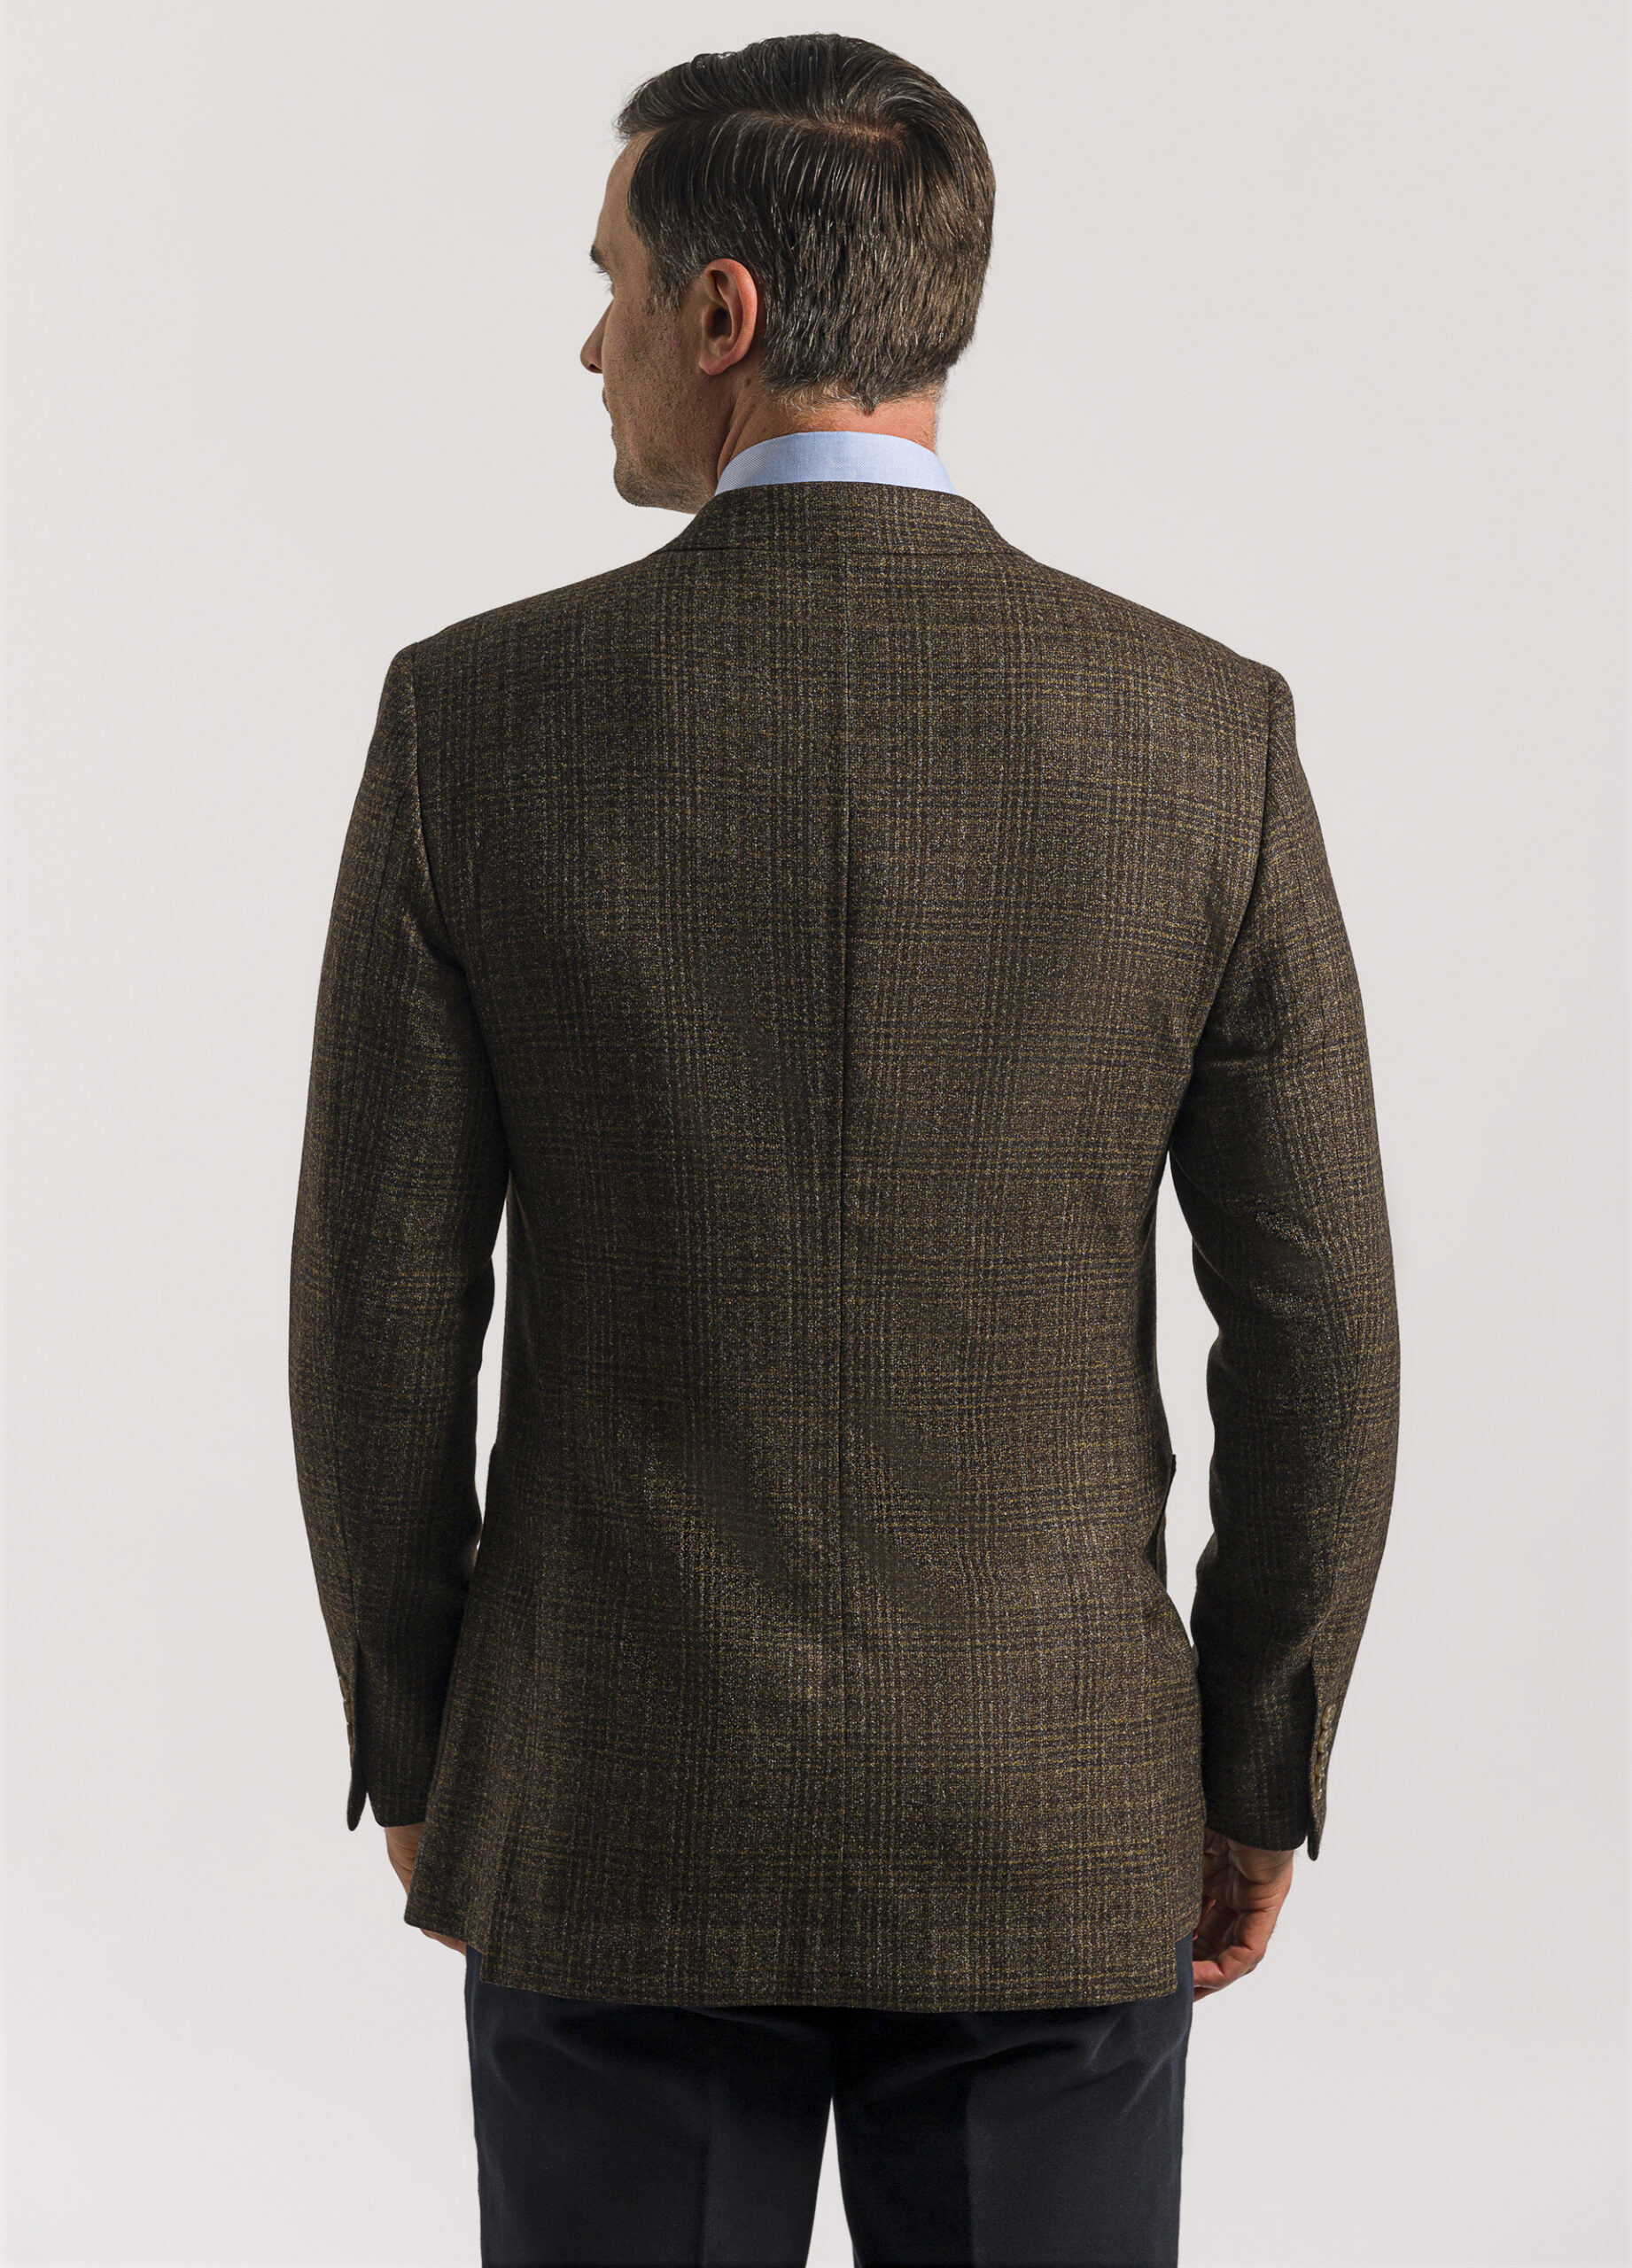 Back of SB Tld Brown-Fawn Glen Check Jacket